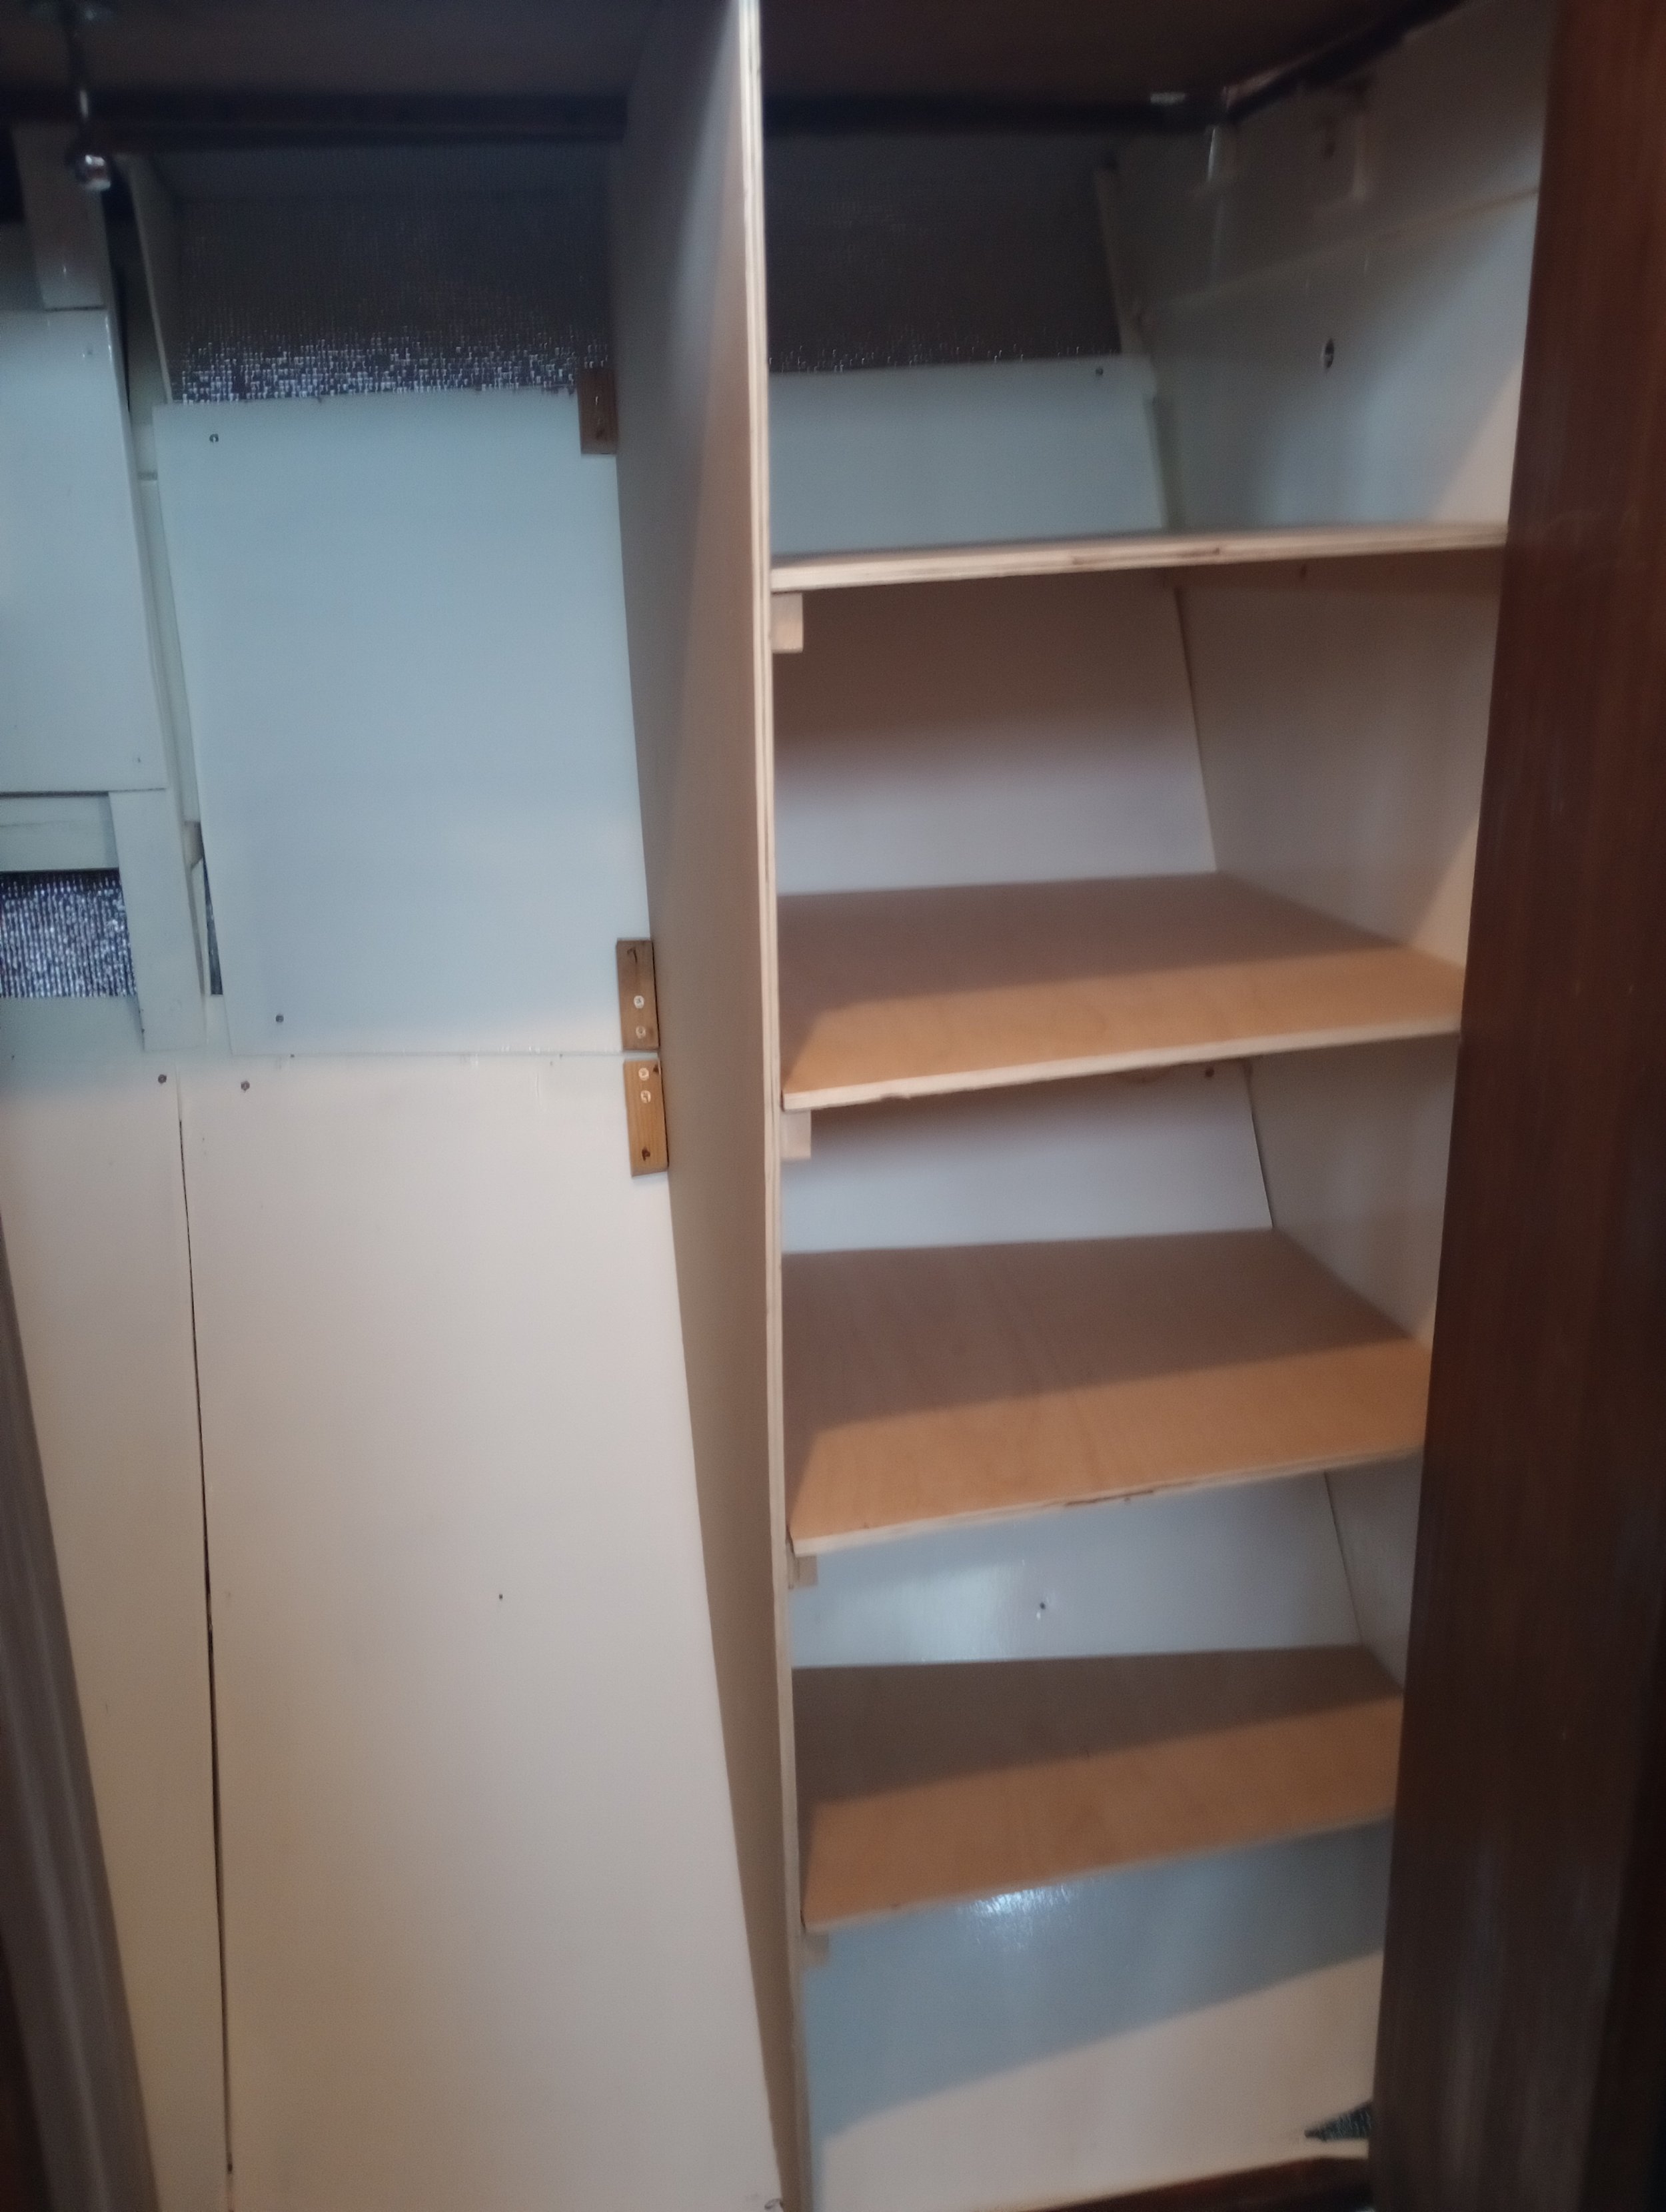 Shelves in place